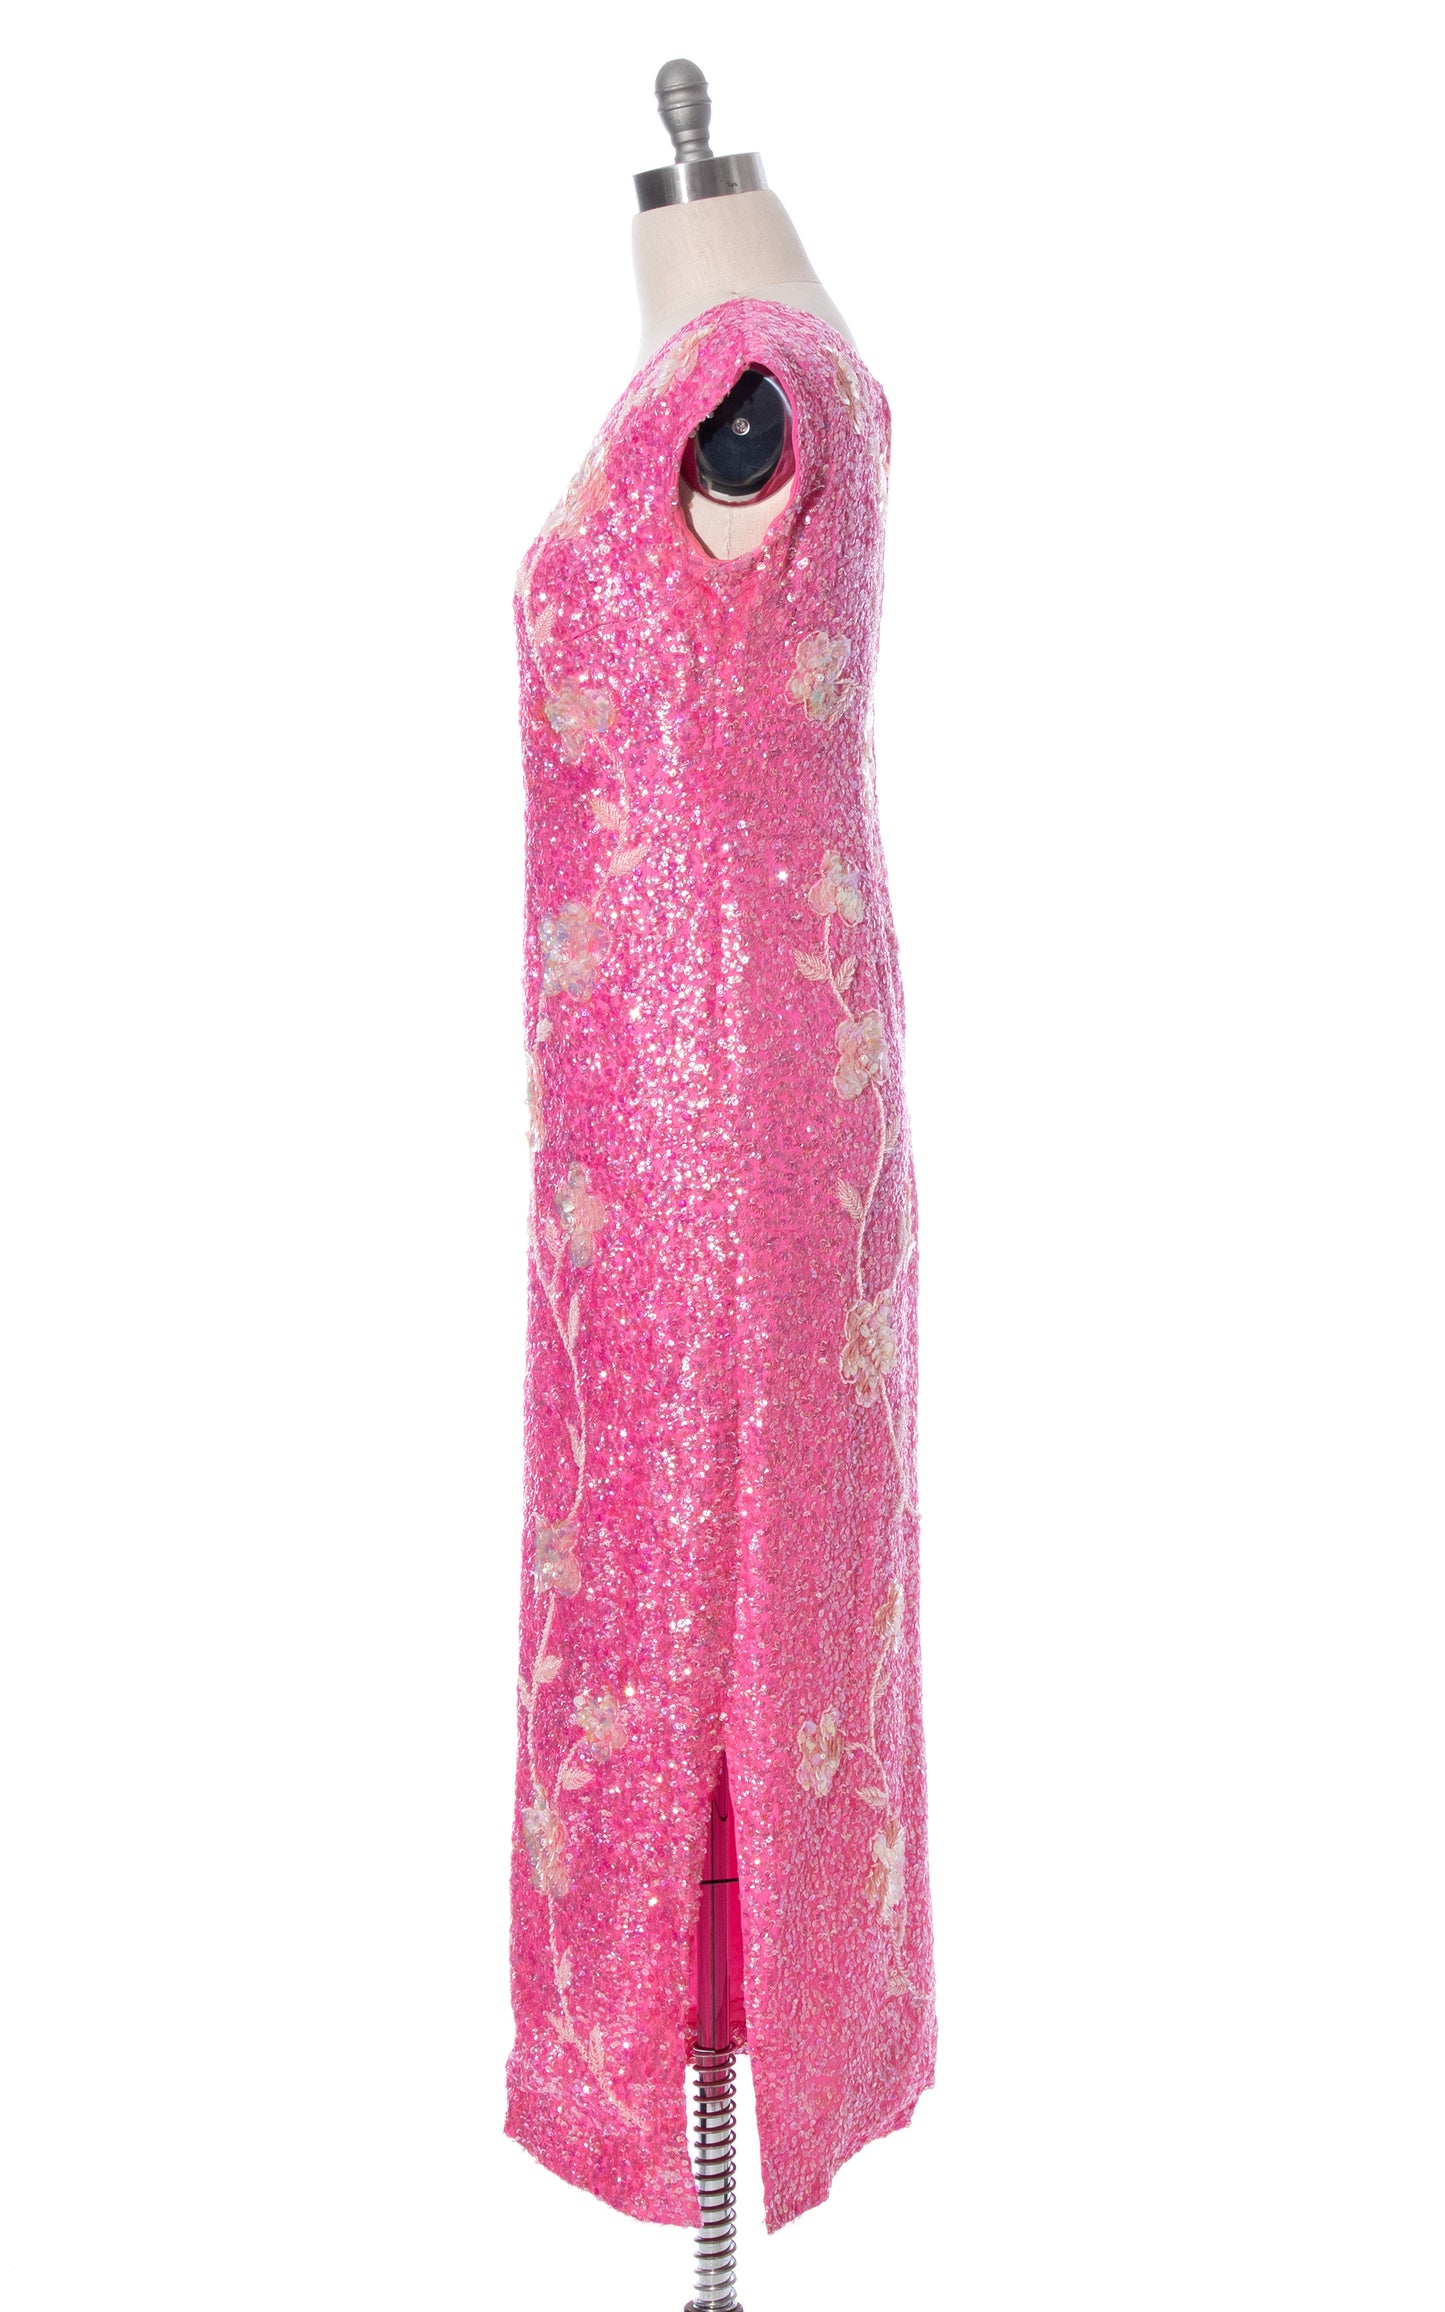 Vintage 1960s 60s Hot Pink Floral Sequined Full Length Evening Gown Party Dress volup plus size BirthdayLifeVintage